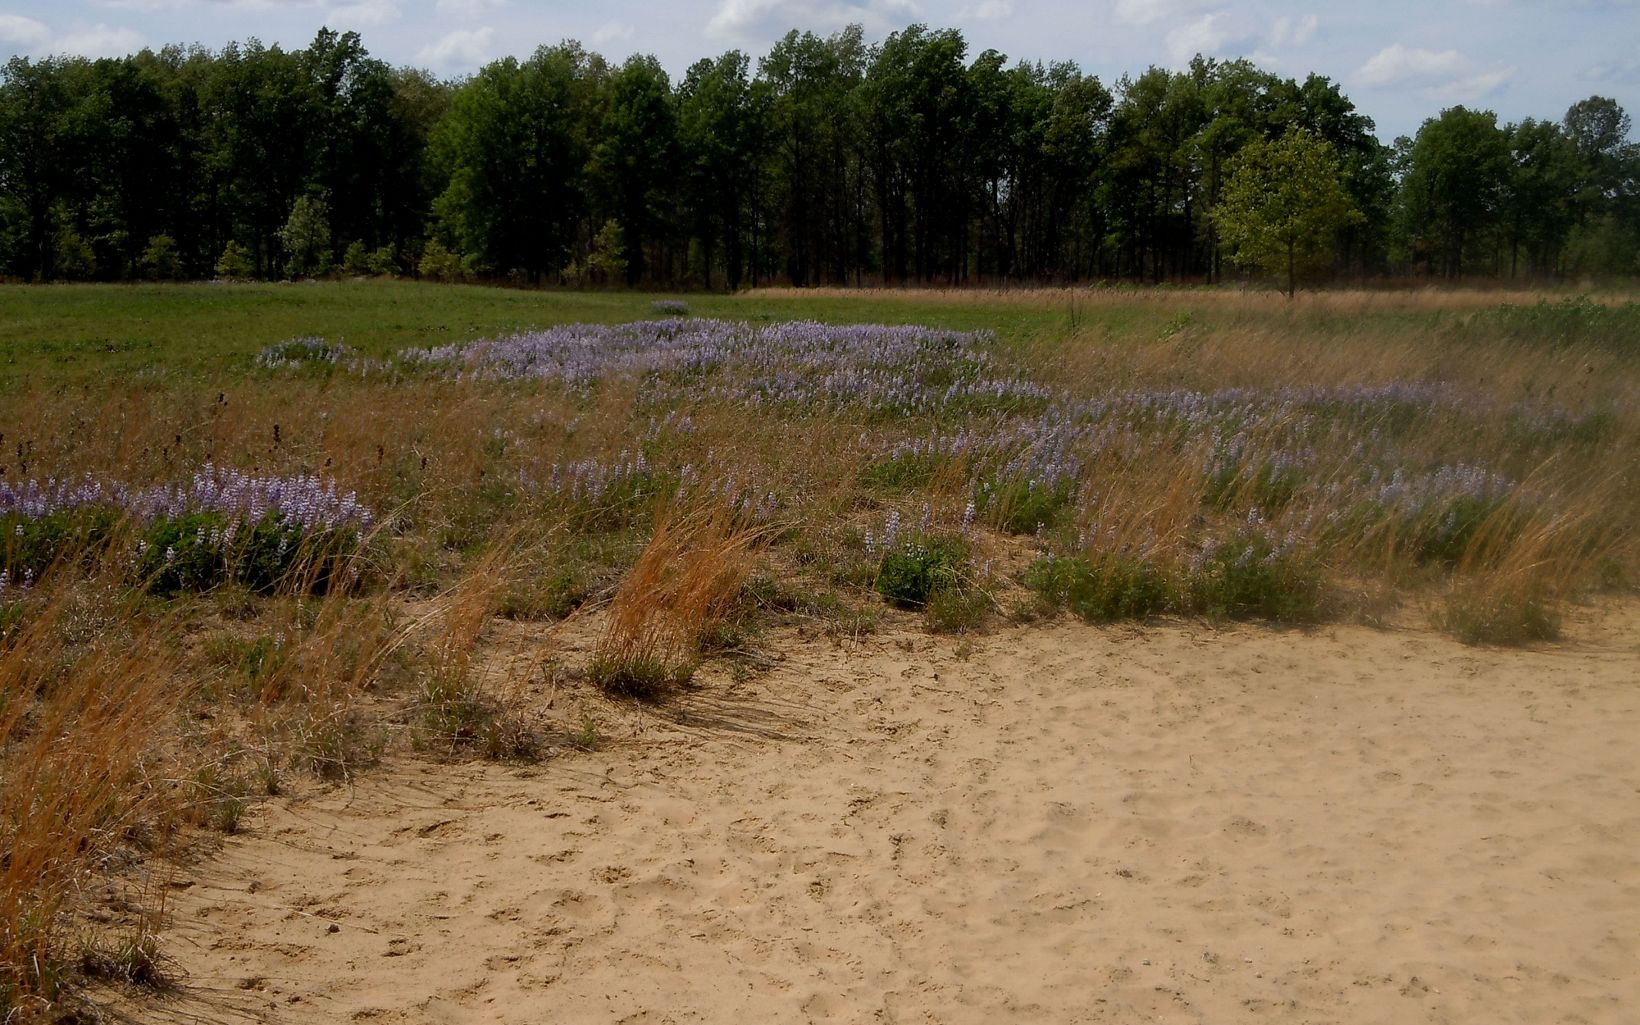 A landscape of sand and grass filled with wildflowers.